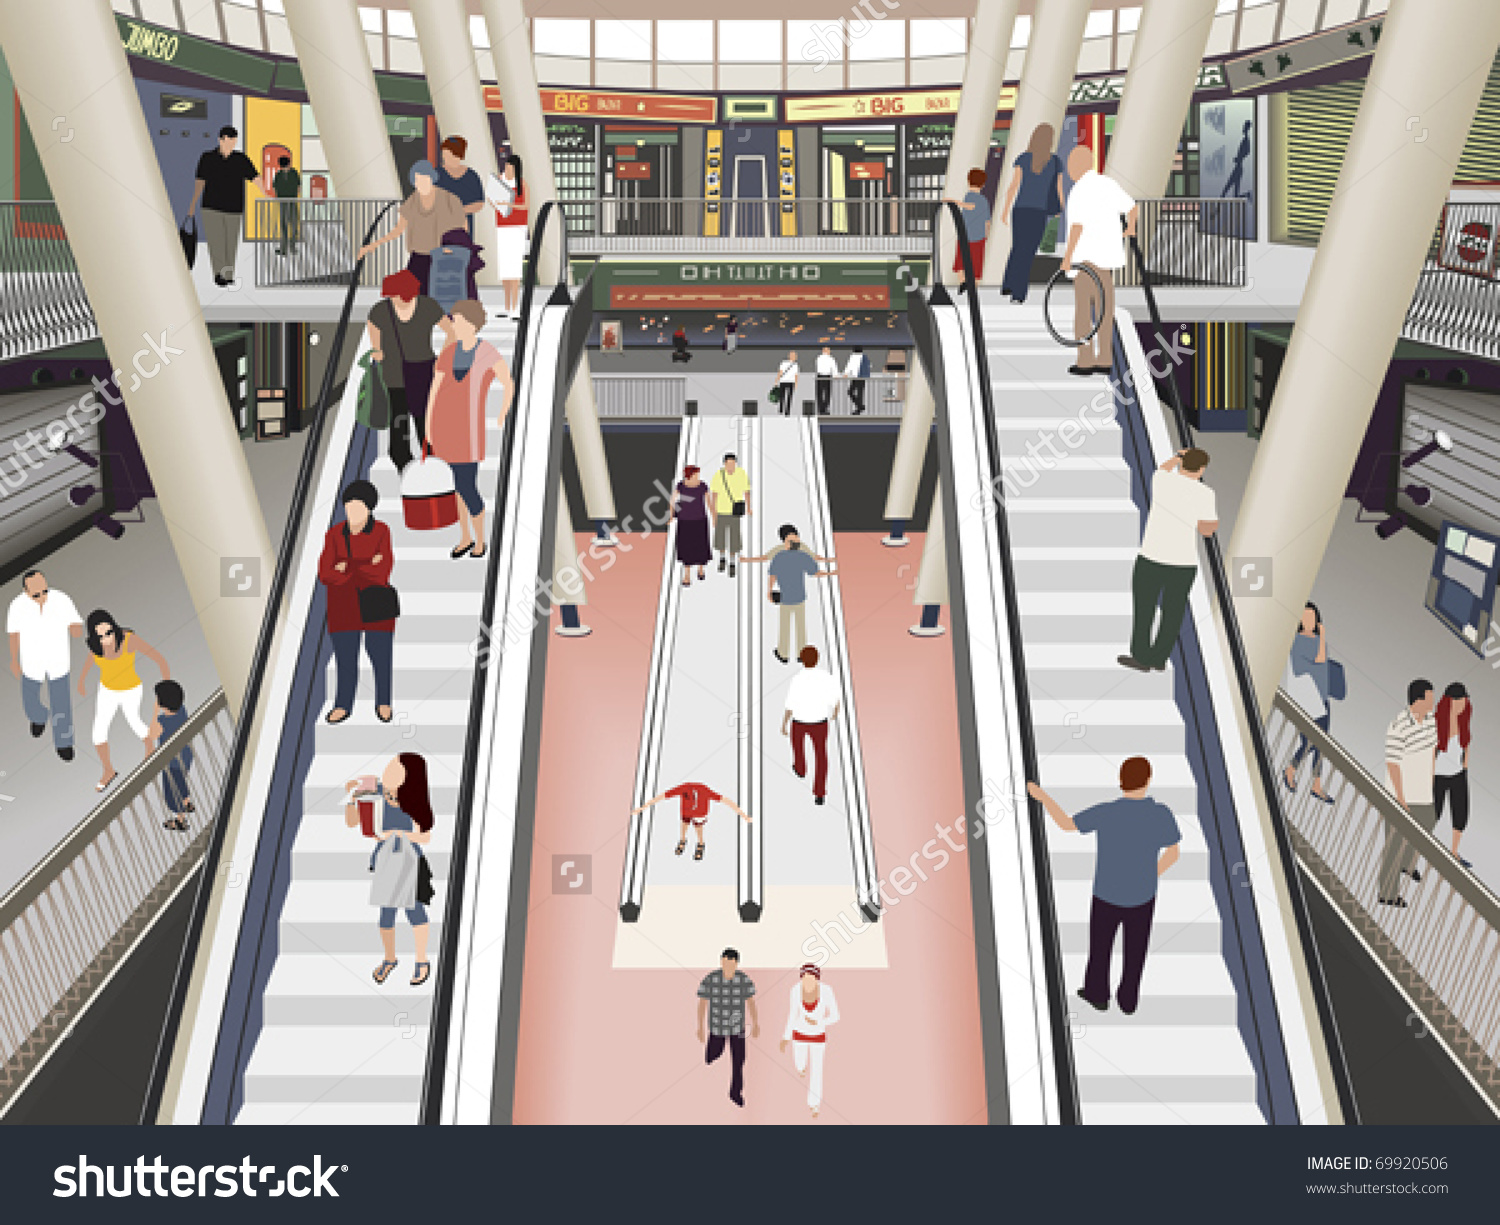 Shopping centre clipart 20 free Cliparts | Download images on